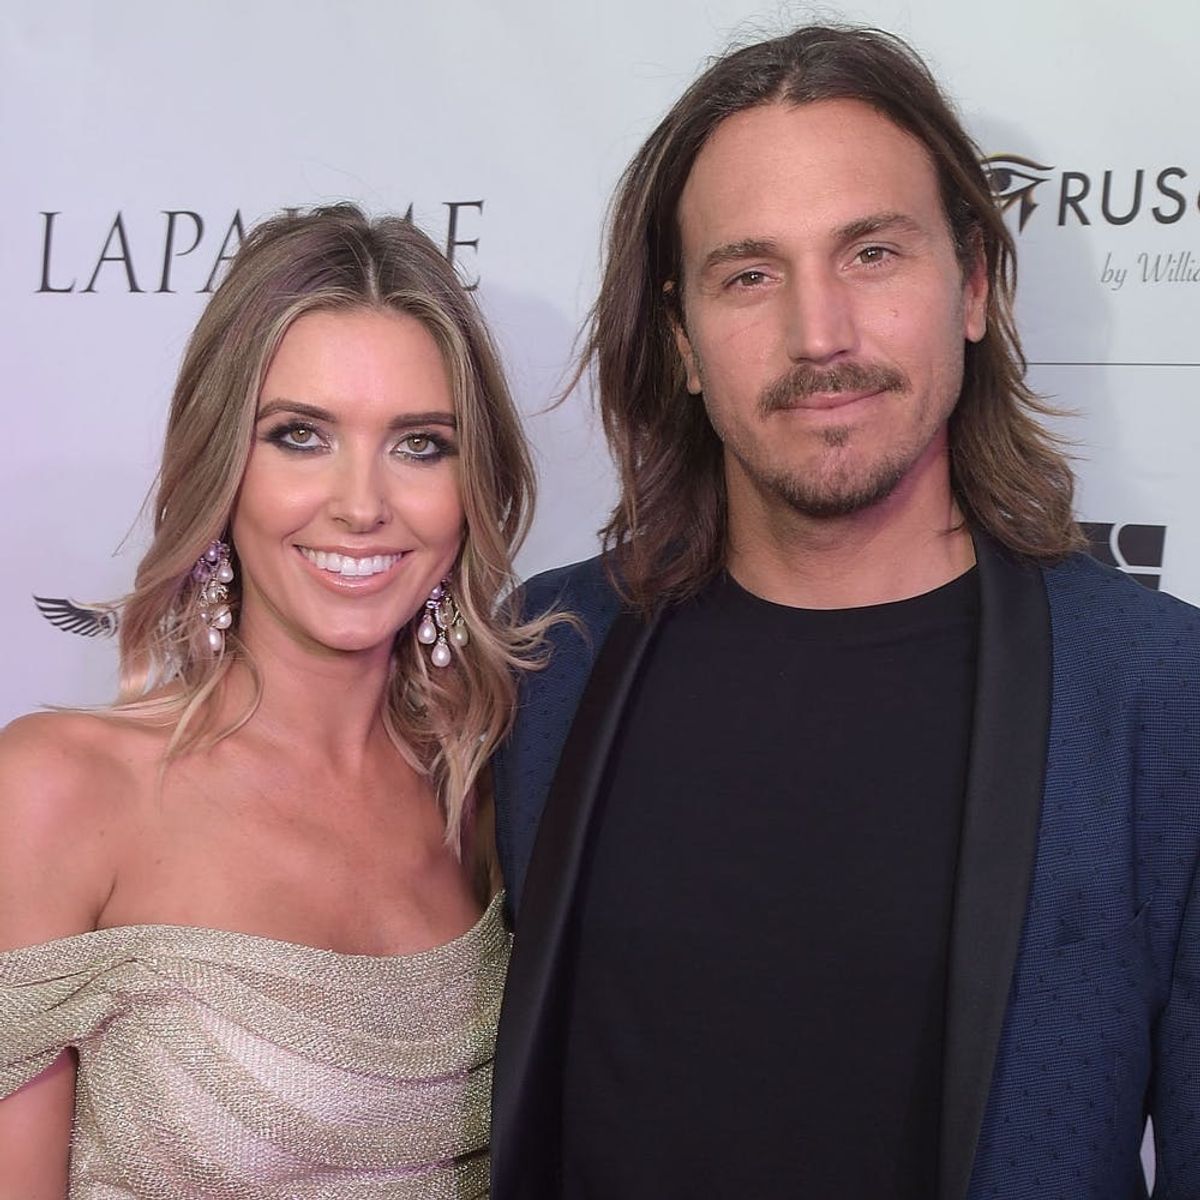 Audrina Patridge Is Divorcing Corey Bohan After Reportedly Filing for a Restraining Order